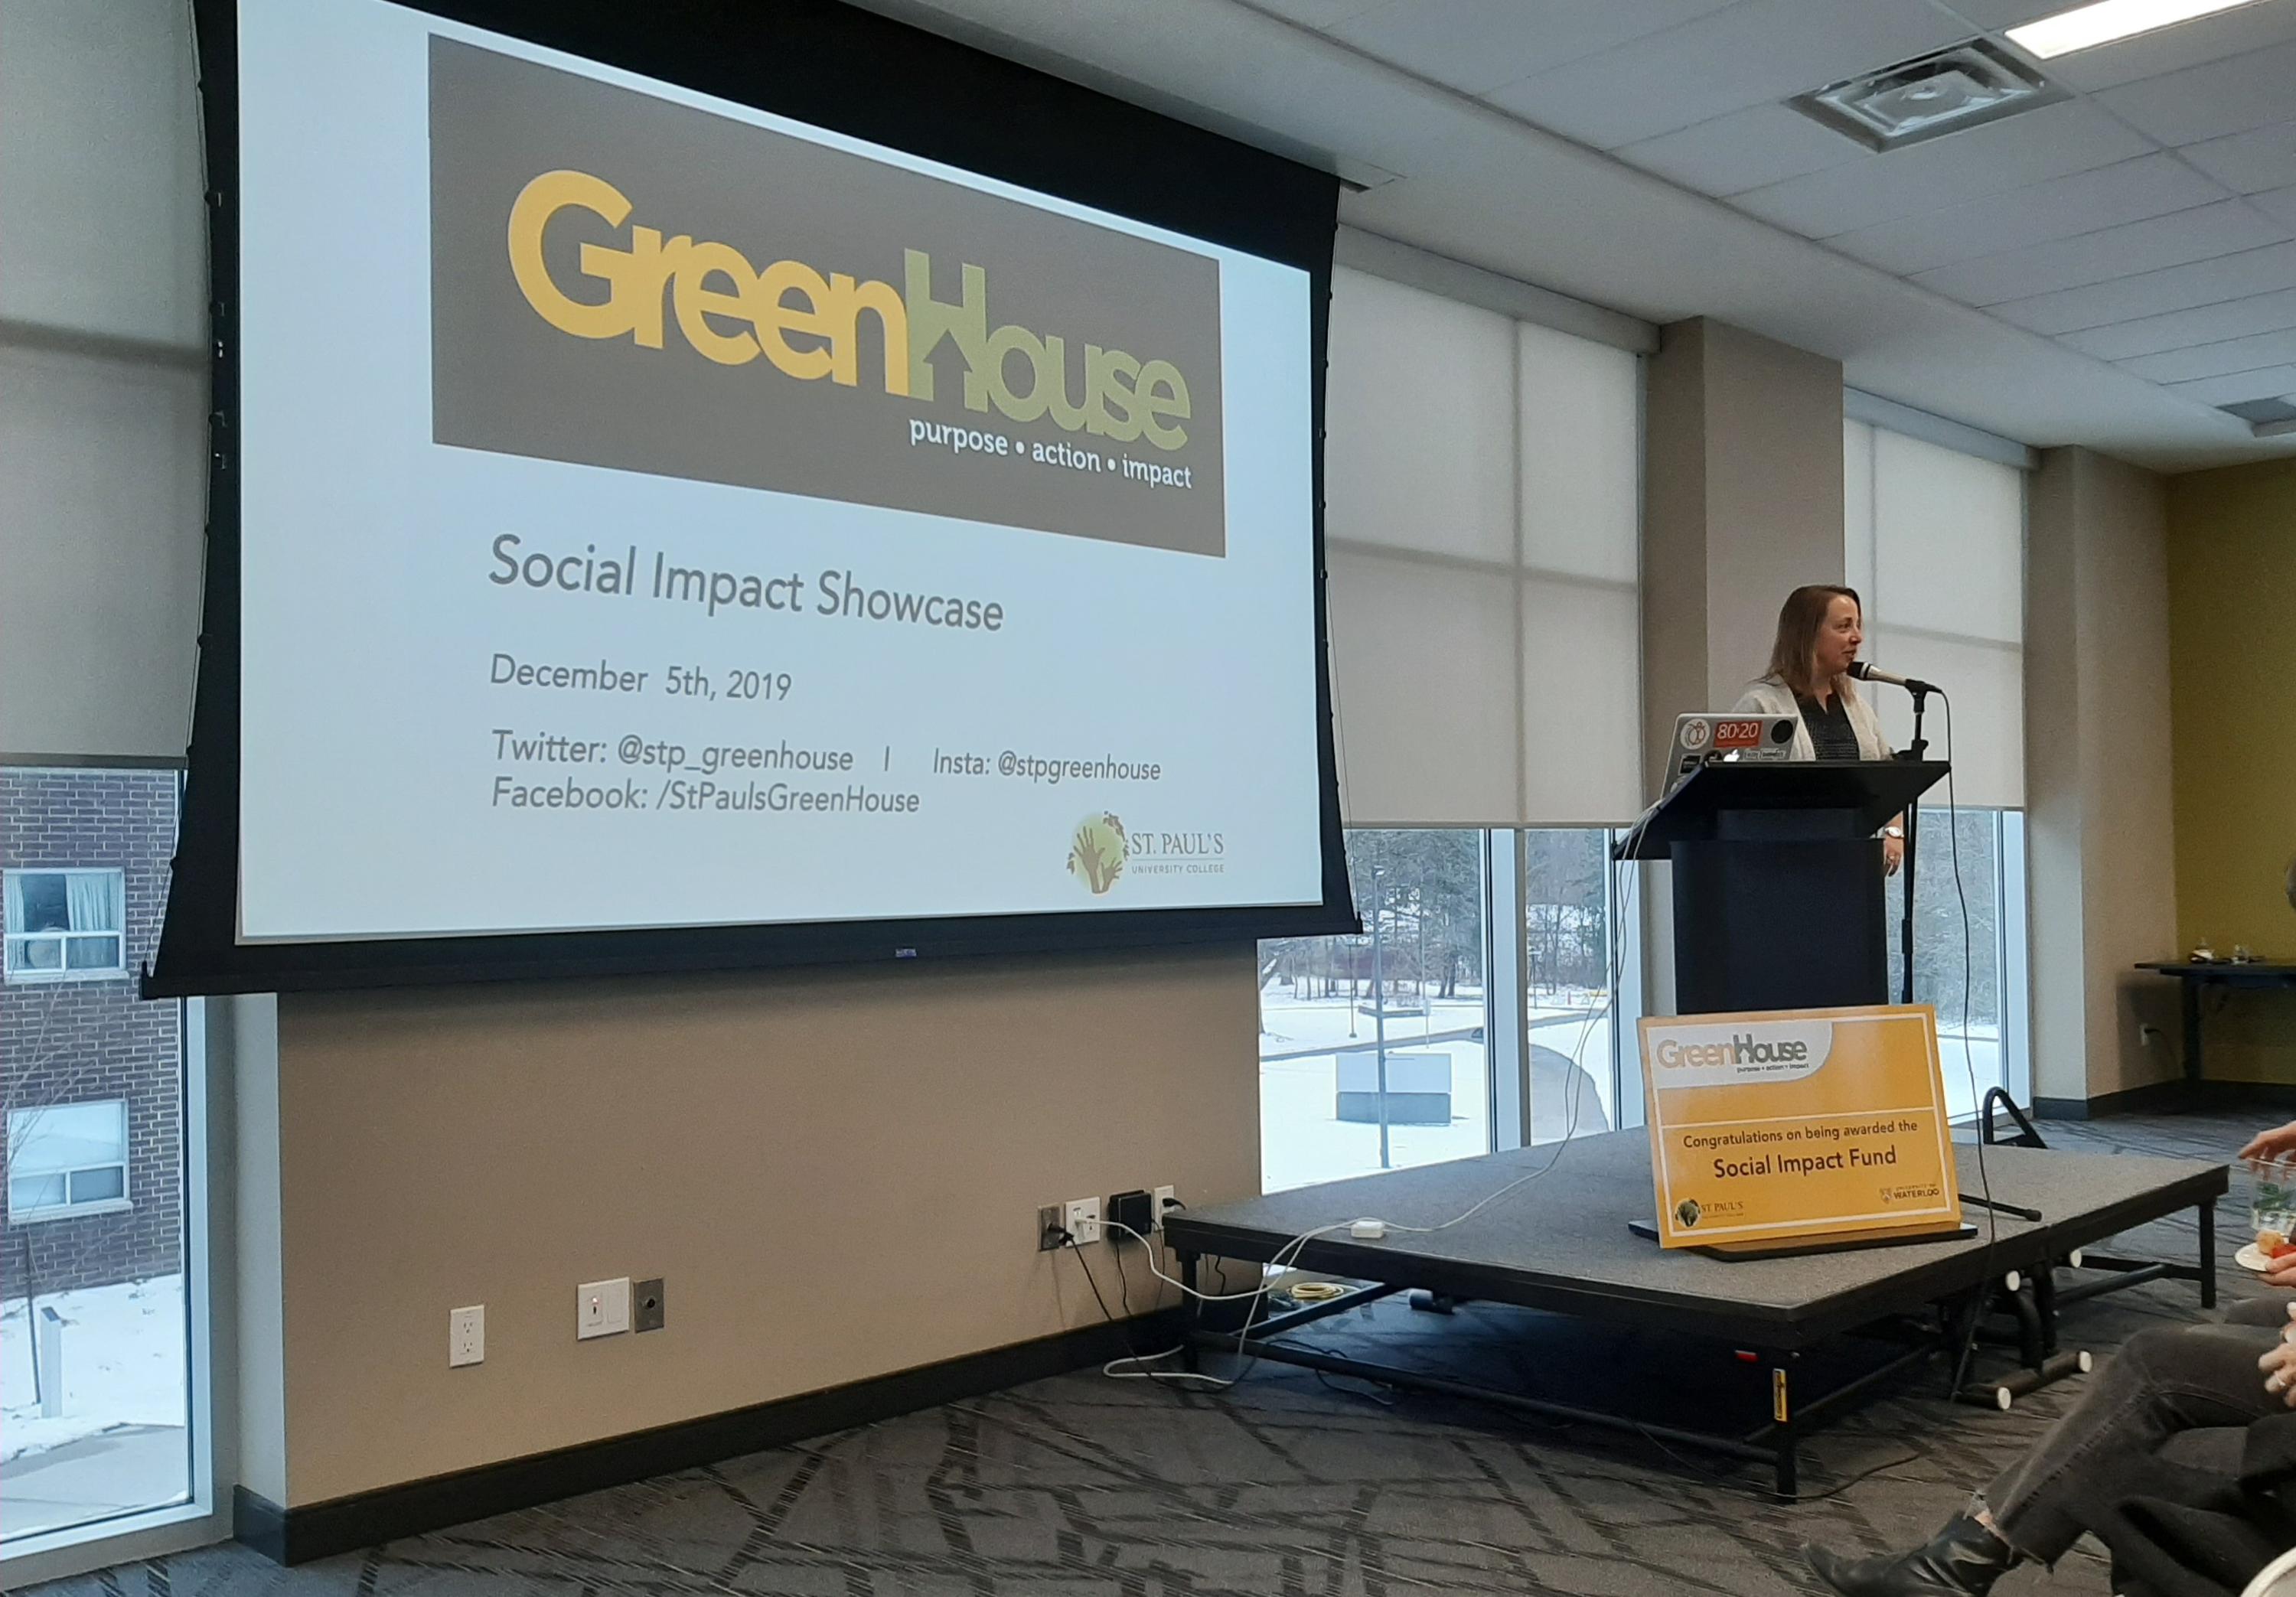 GreenHouse Director Tania Del Matto provides opening remarks at the Social Impact Showcase on December 5, 2019.